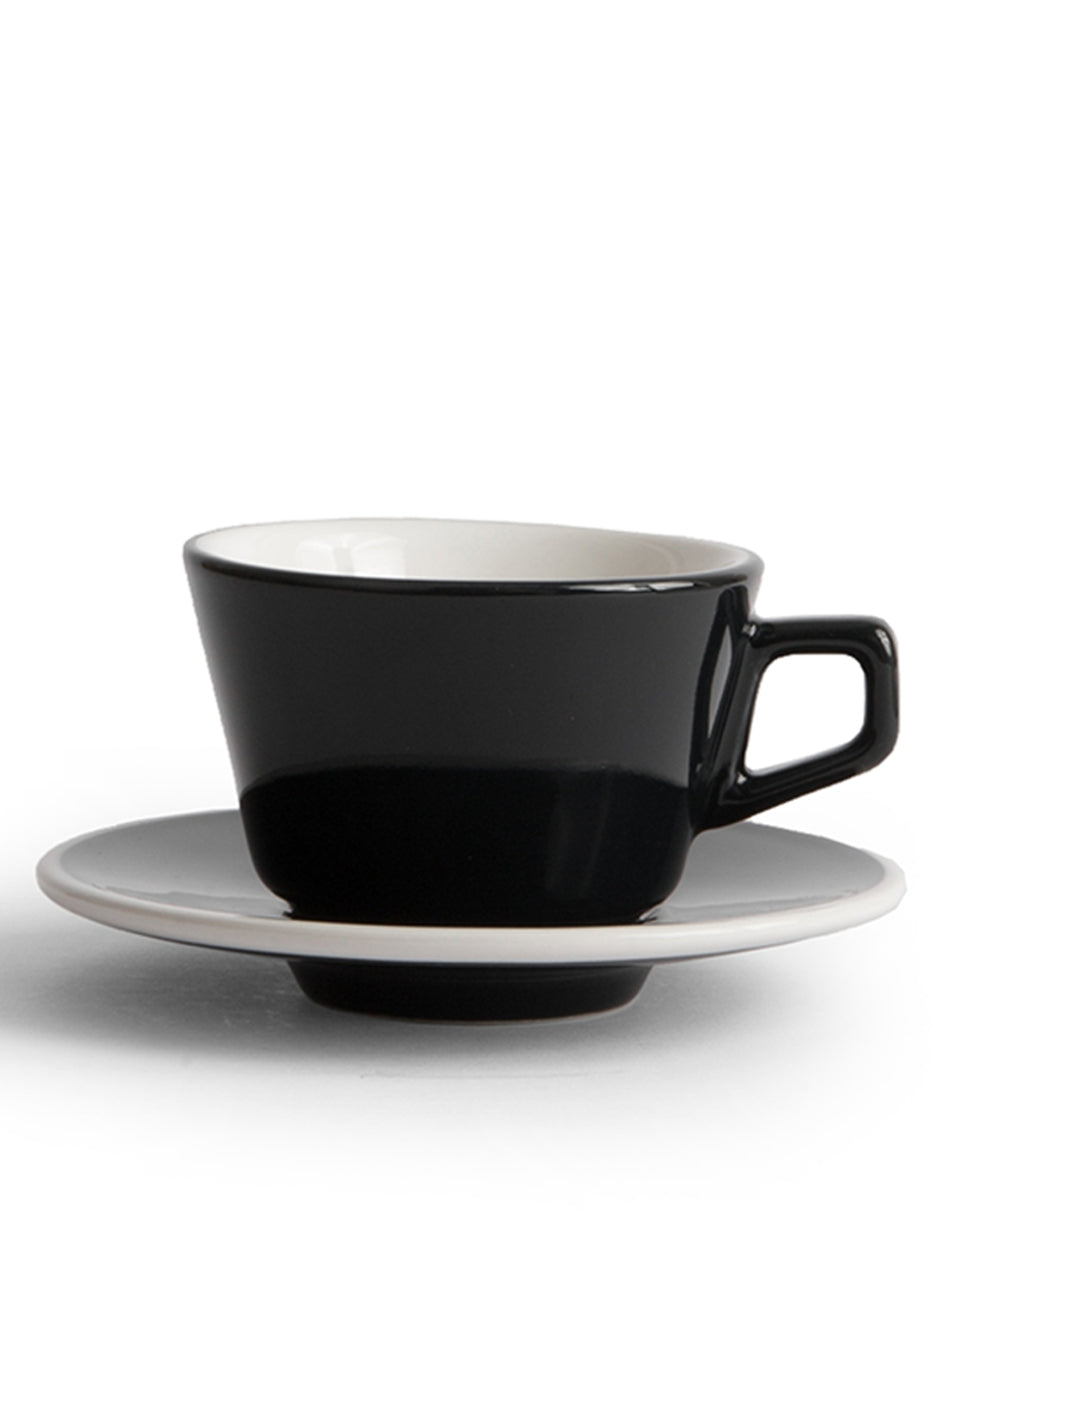 CREATED CO. Angle Espresso Saucer (Saucer Only)